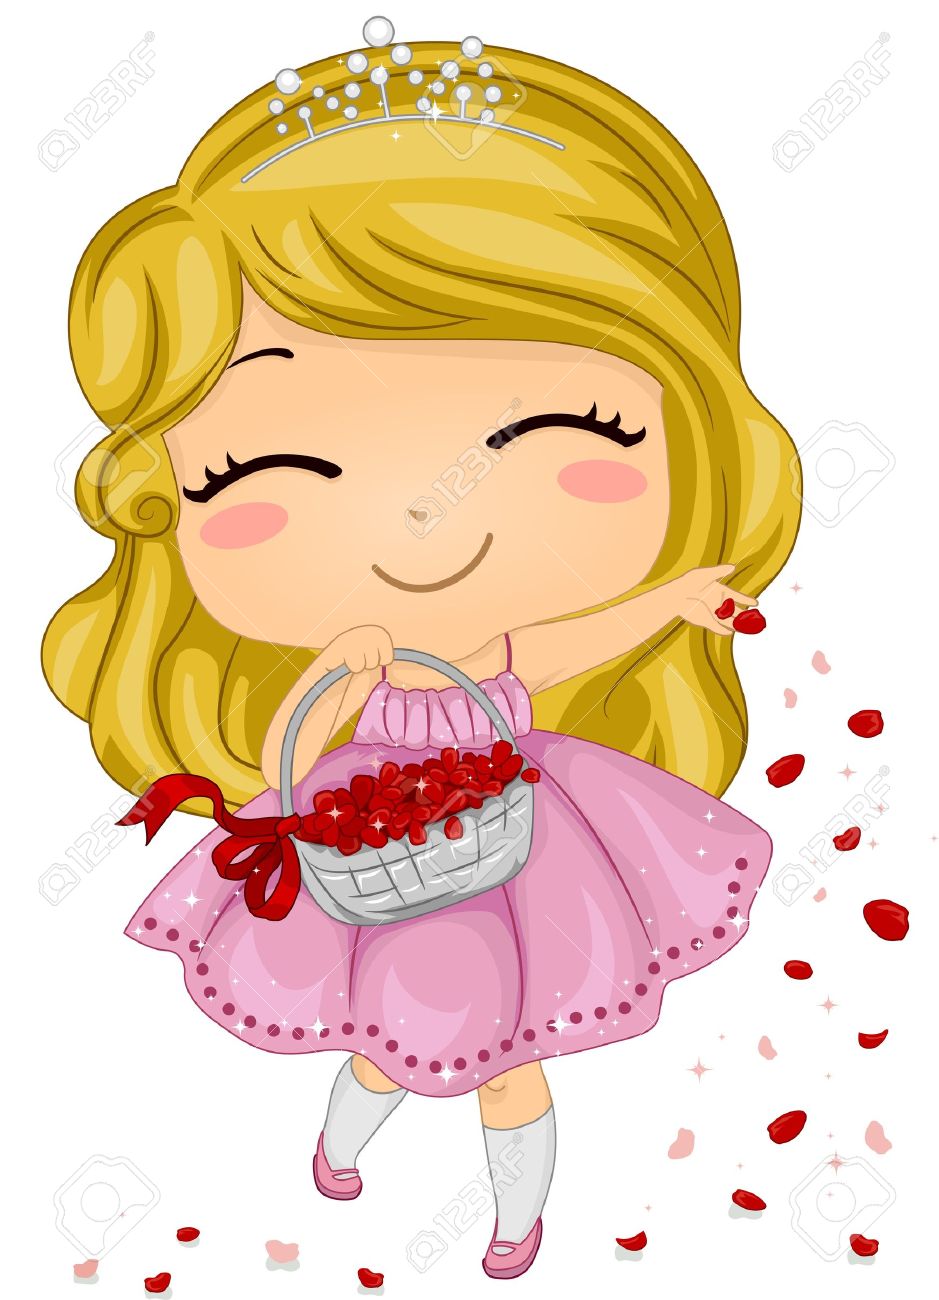 Flower Girl Clipart & Look At Clip Art Images.